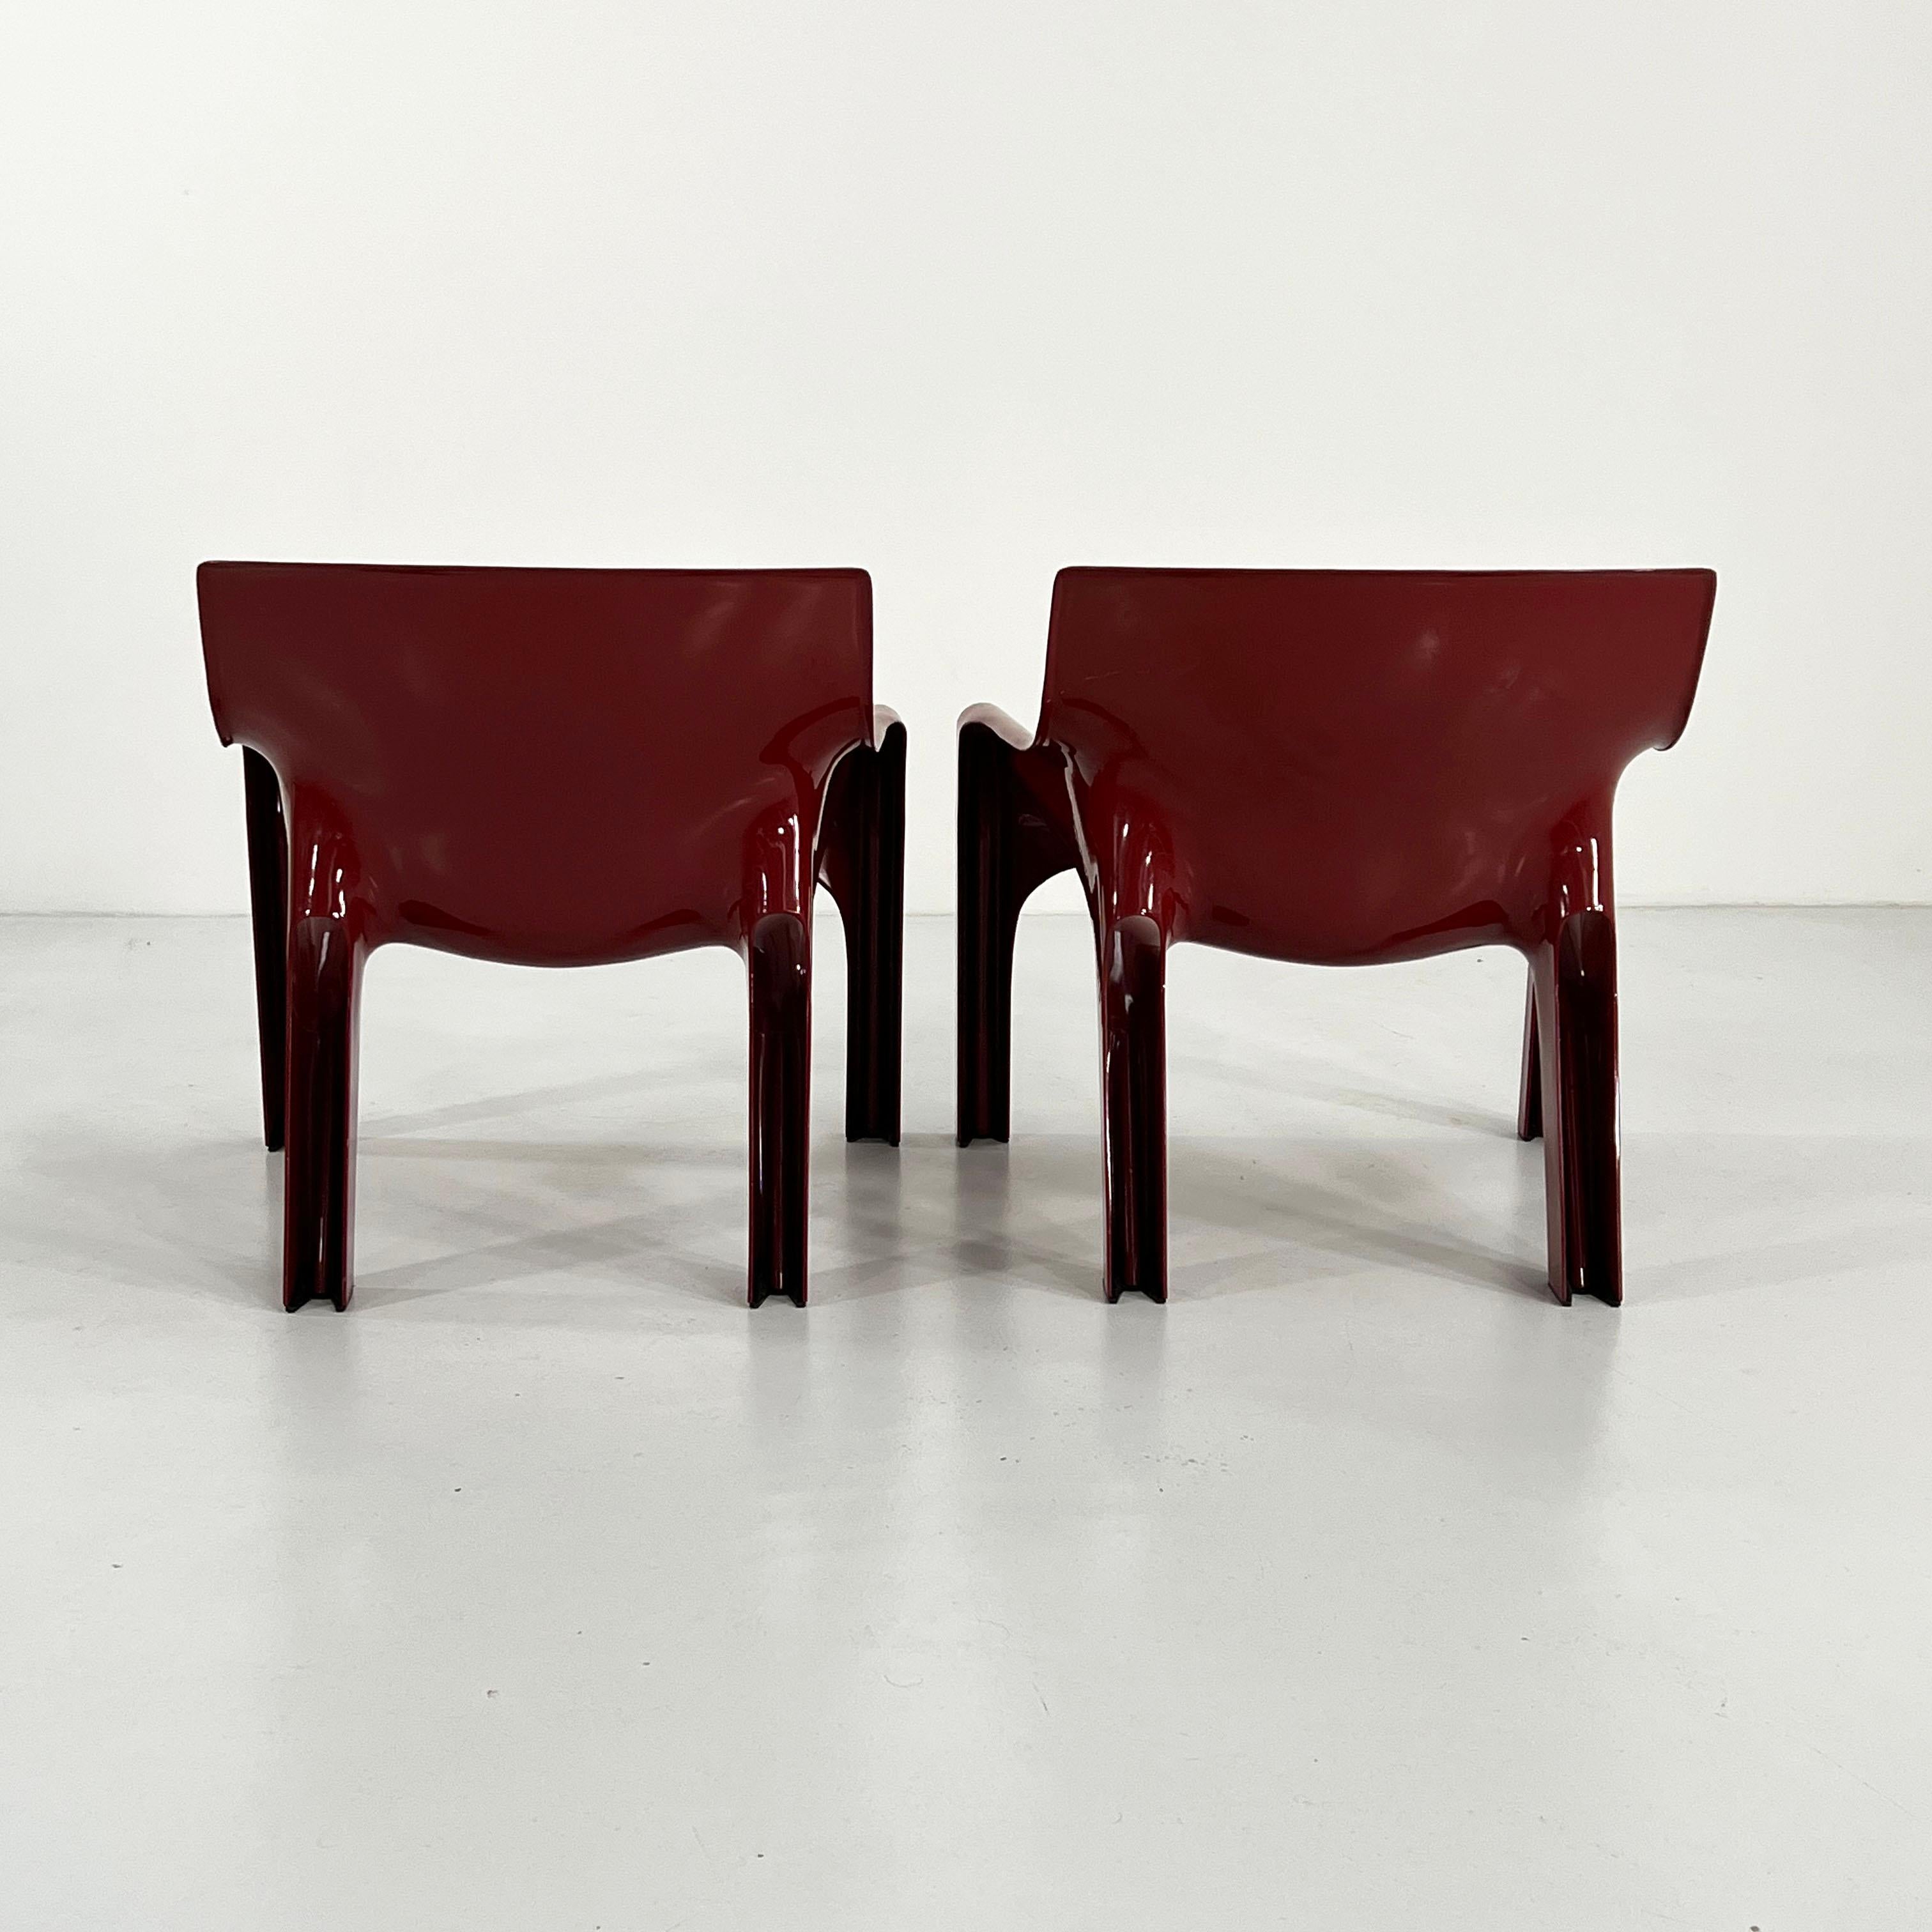 Late 20th Century Pair of Burgundy Vicario Lounge Chair by Vico Magistretti for Artemide, 1970s